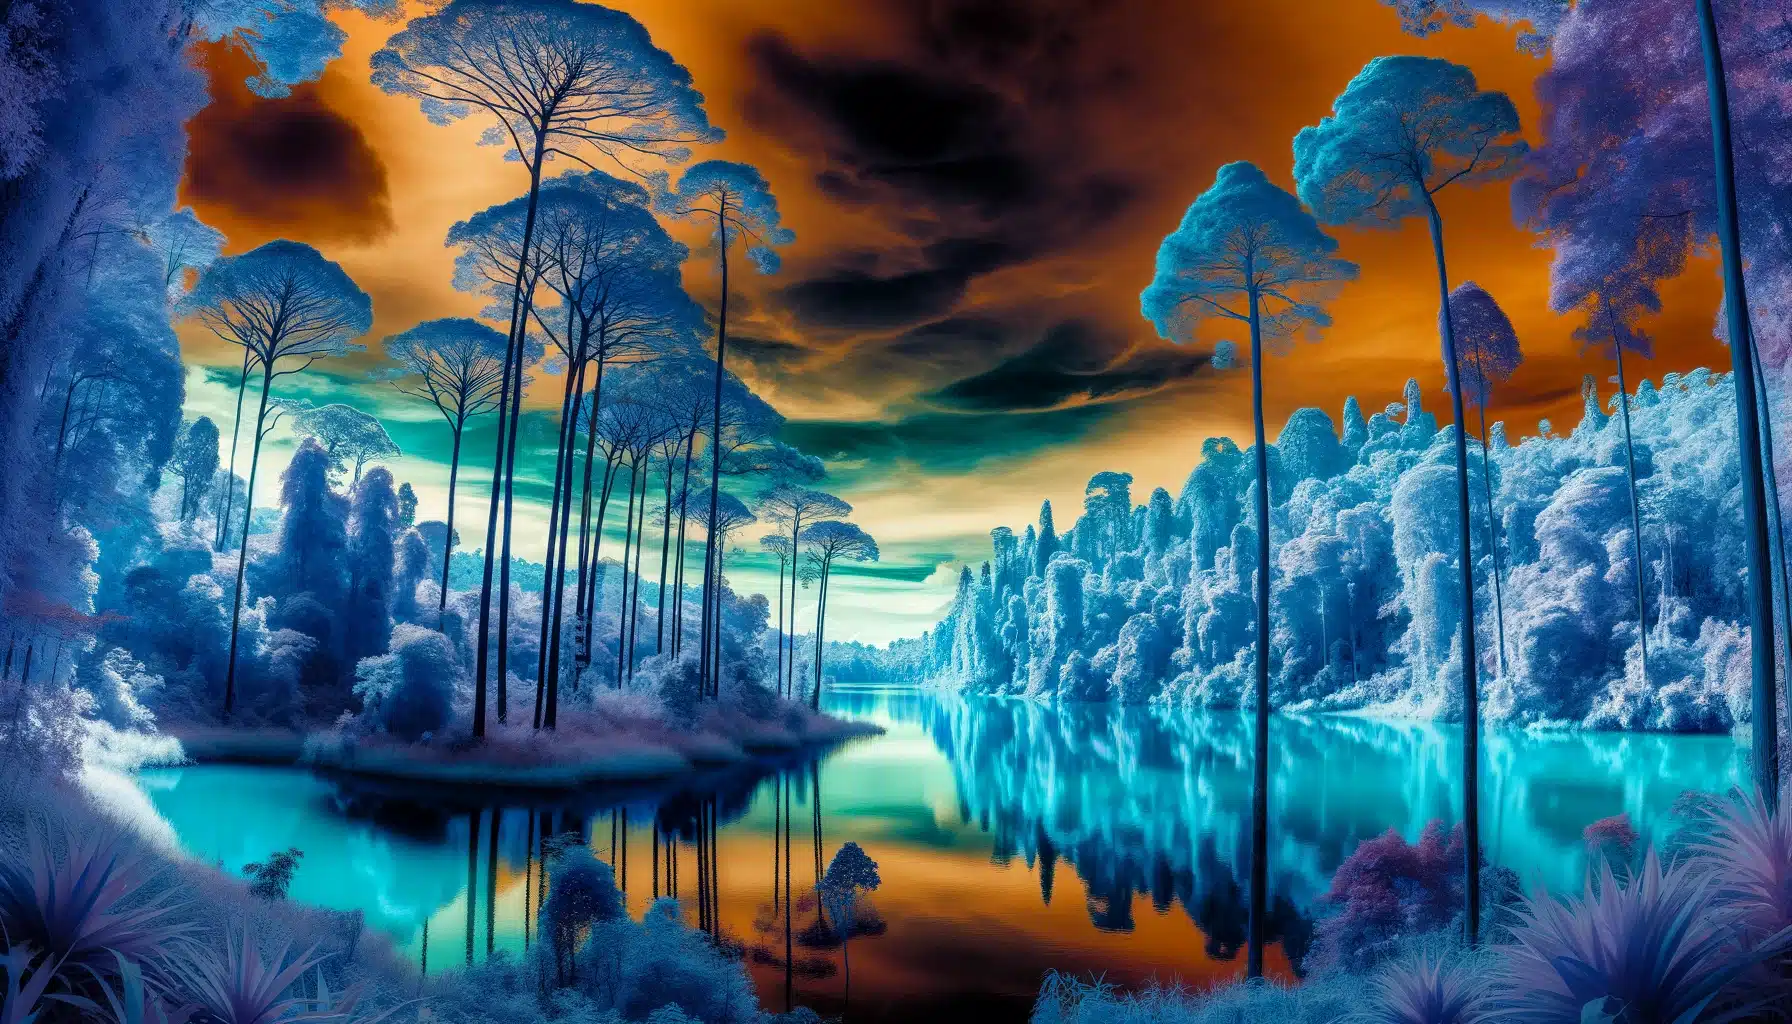 A serene lake surrounded by towering trees, all depicted with inverted colors creating a surreal, dreamlike landscape.